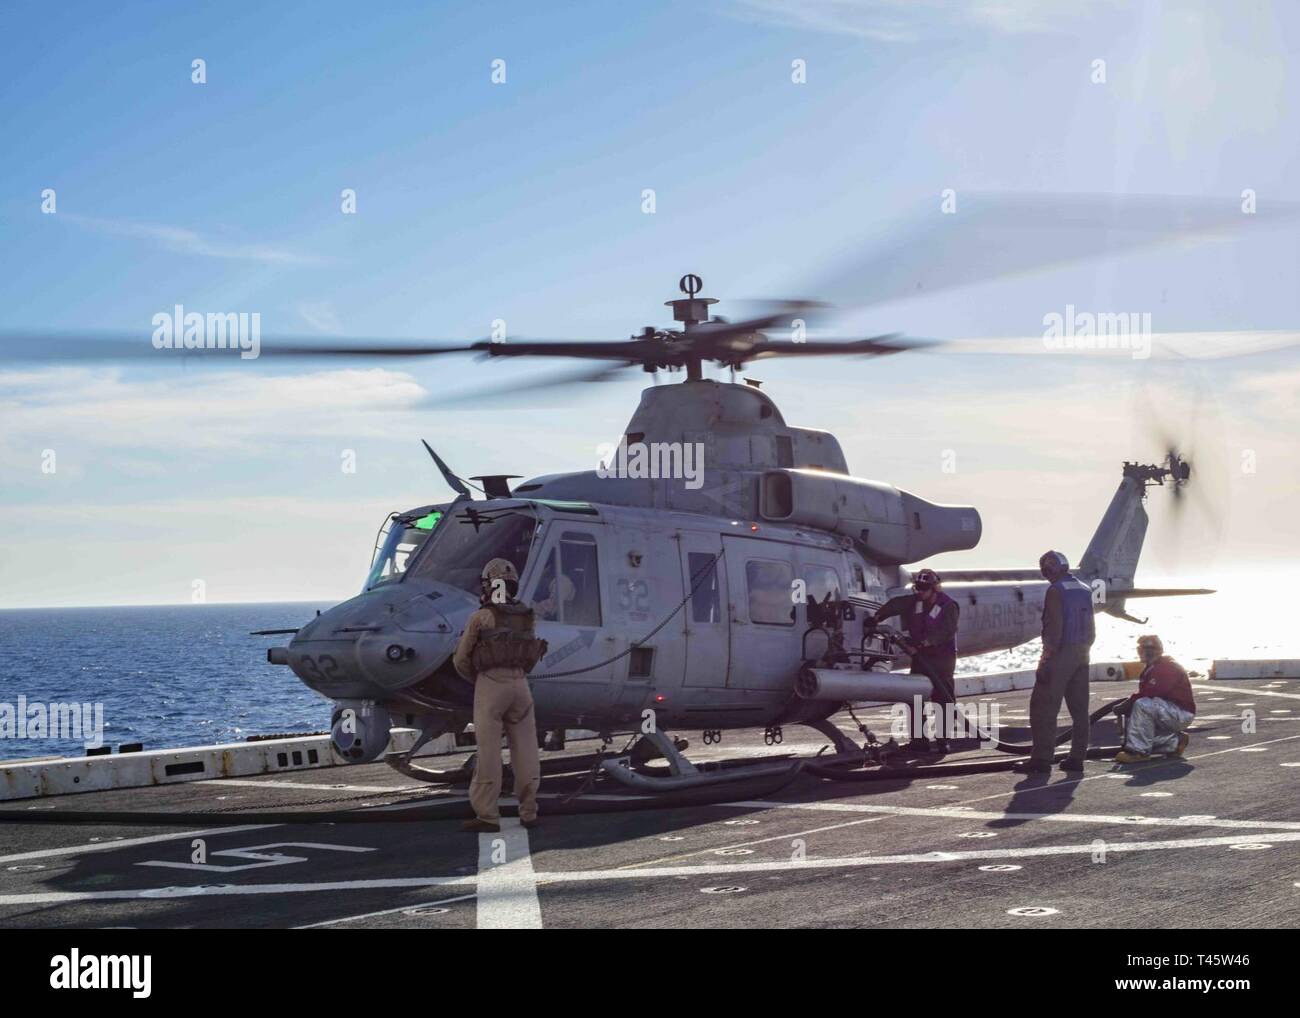 MEDITERRANEAN SEA (Mar. 8, 2019) Sailors refuel a UH-1Y Huey helicopter assigned to the “Black Knights” of Marine Medium Tiltrotor Squadron (VMM) 264 (Reinforced) on the flight deck of the San Antonio-class amphibious transport dock ship USS Arlington (LPD 24), Mar. 8, 2019. Arlington is on a scheduled deployment as part of the Kearsarge Amphibious Ready Group in support of maritime security operations, crisis response and theater security cooperation, while also providing a forward naval presence. Stock Photo